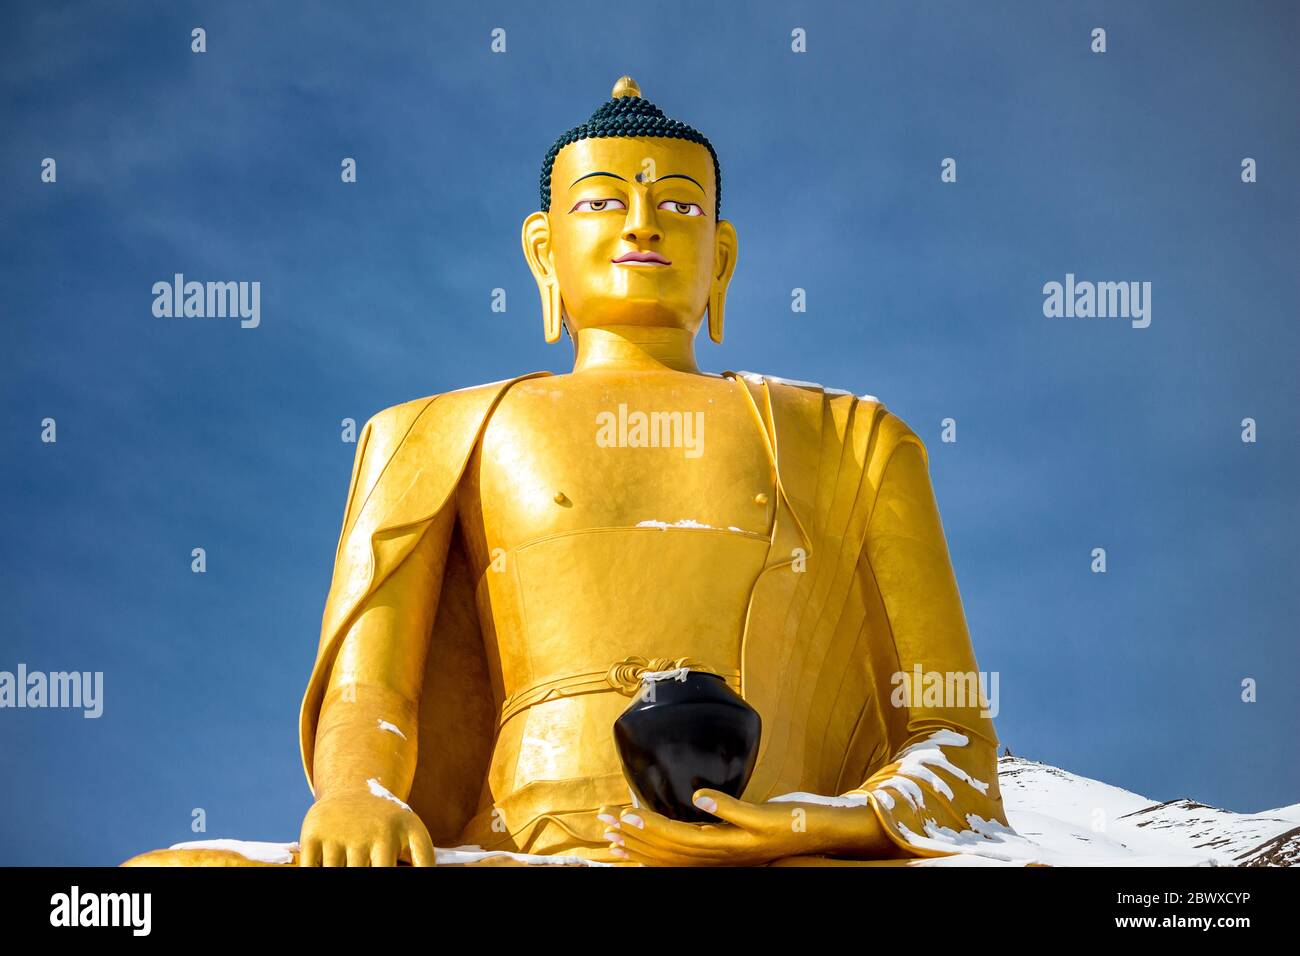 Golden Maitreya Buddha, Ladakh - A large sculpture of Maitreya Buddha situated in the land of diversified culture, Ladakh, India. Religious place. Stock Photo